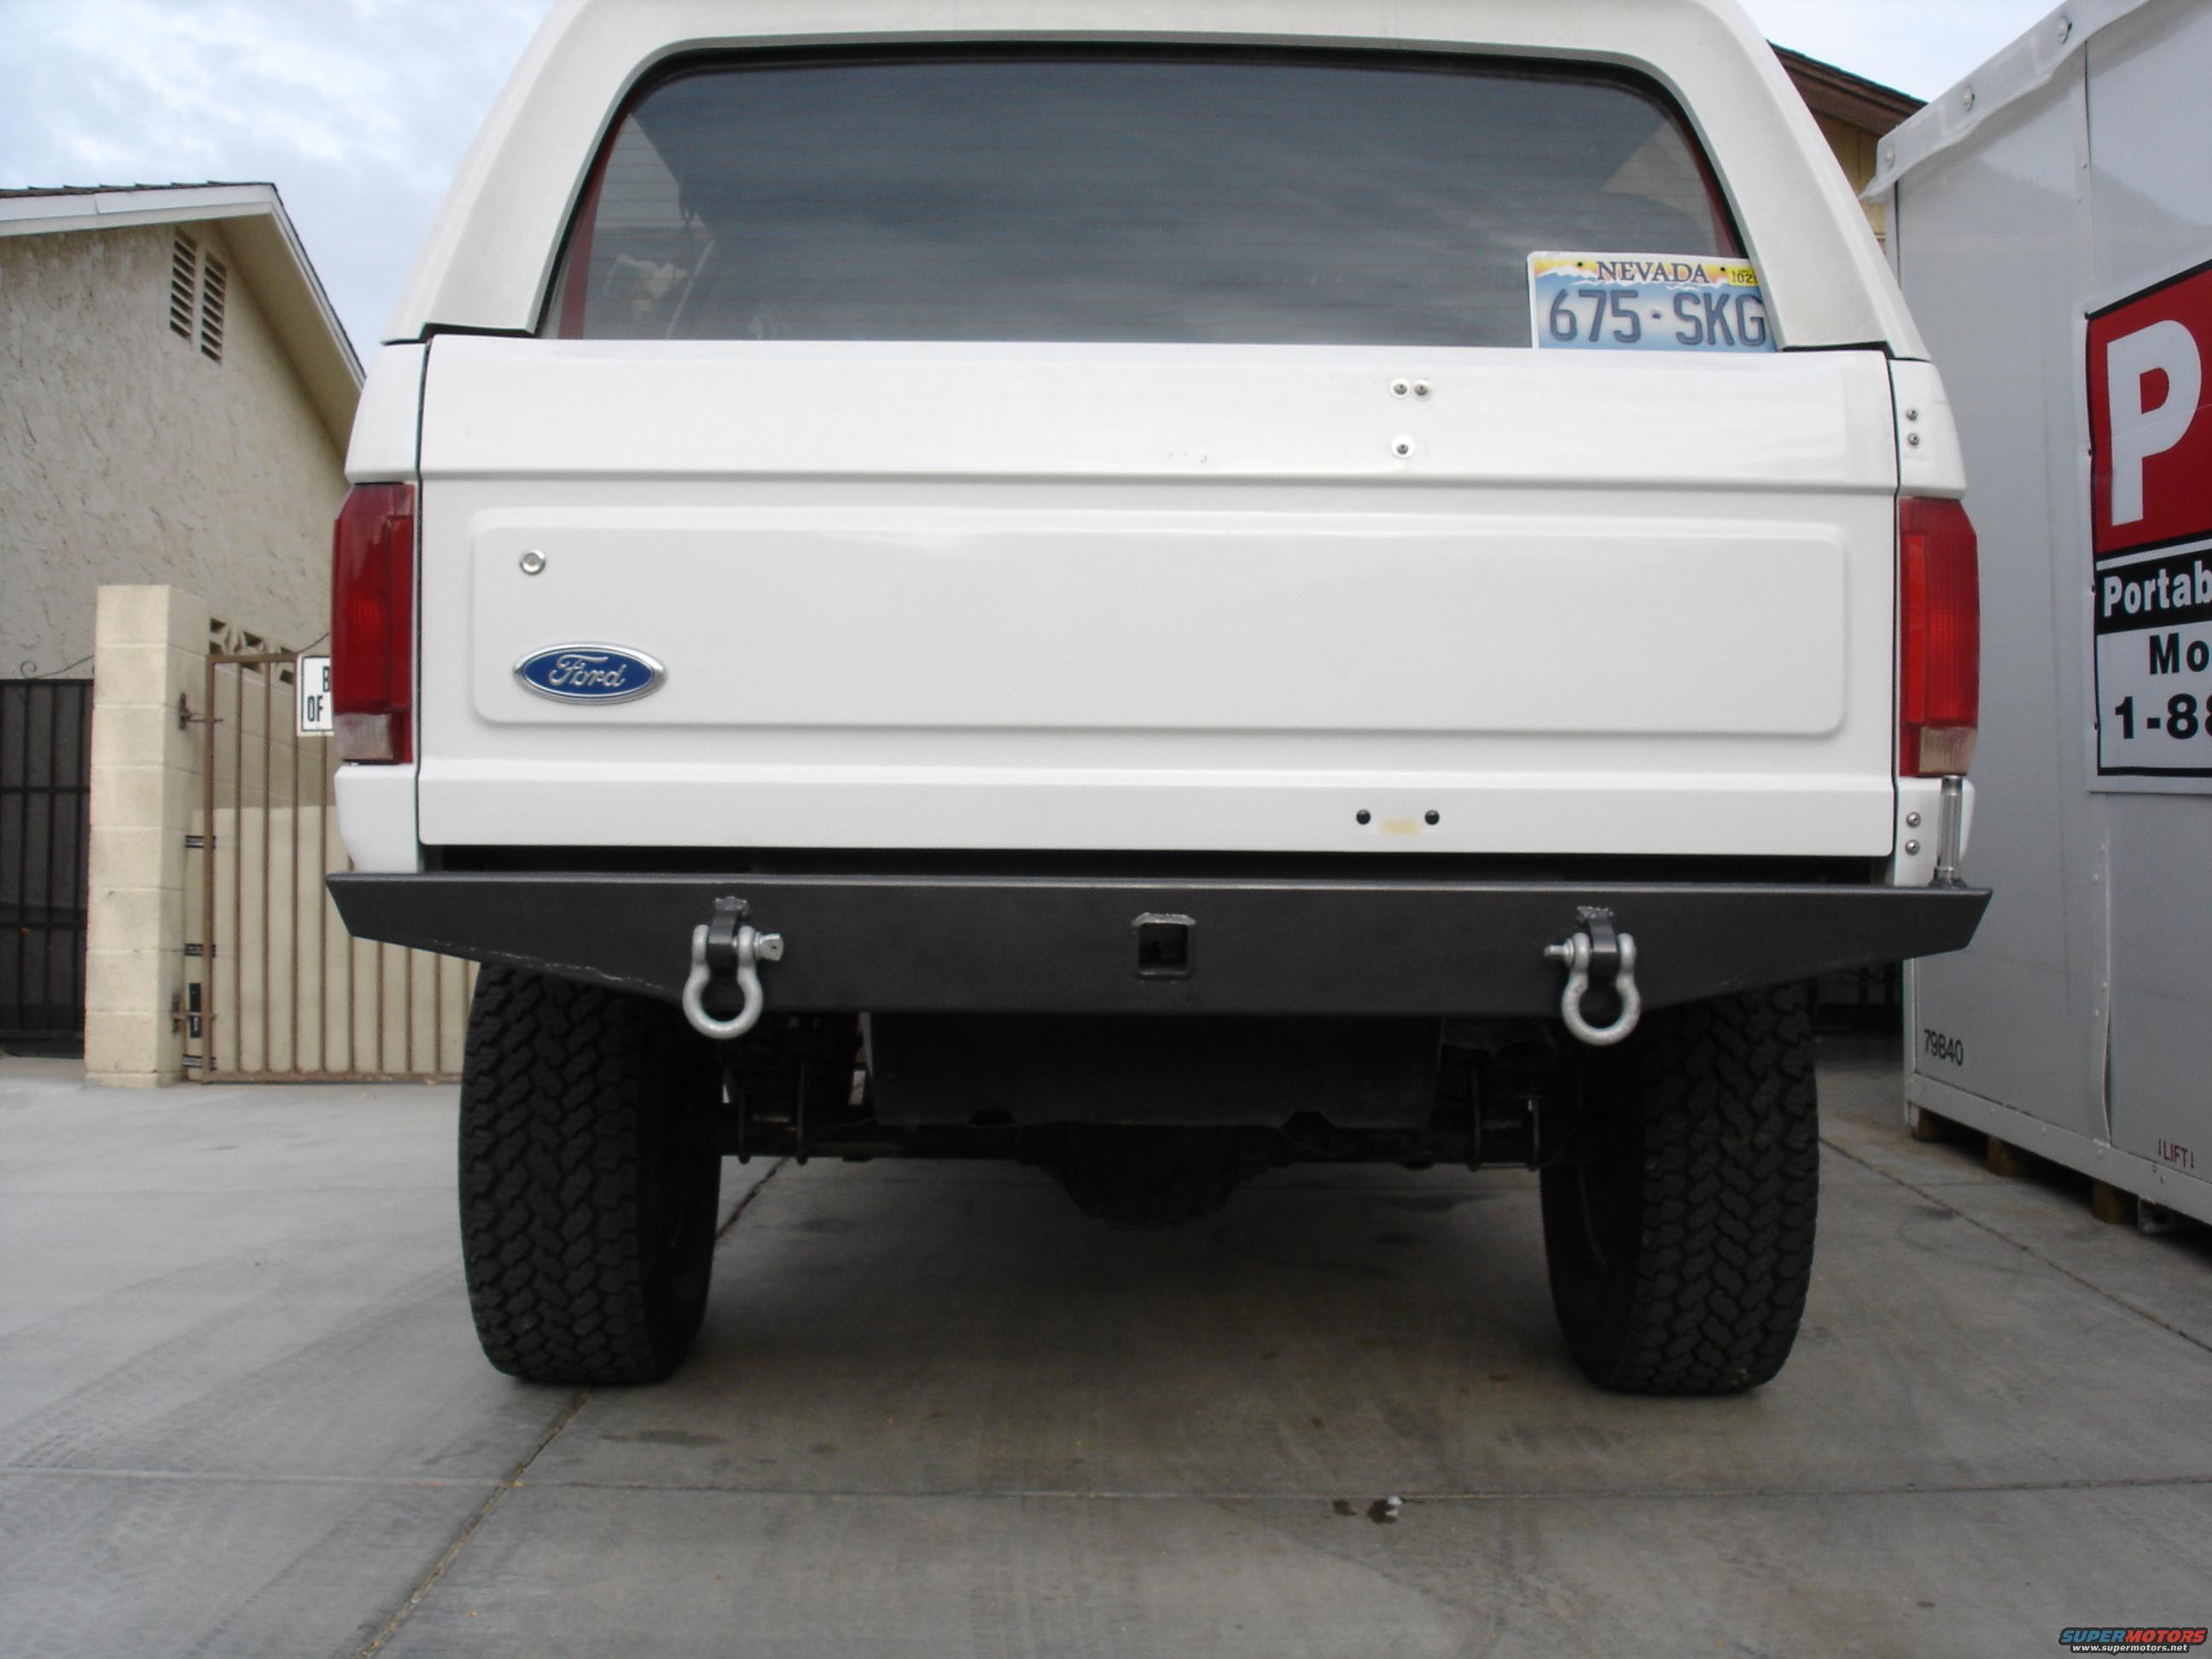 1996 Ford bronco bumpers #5